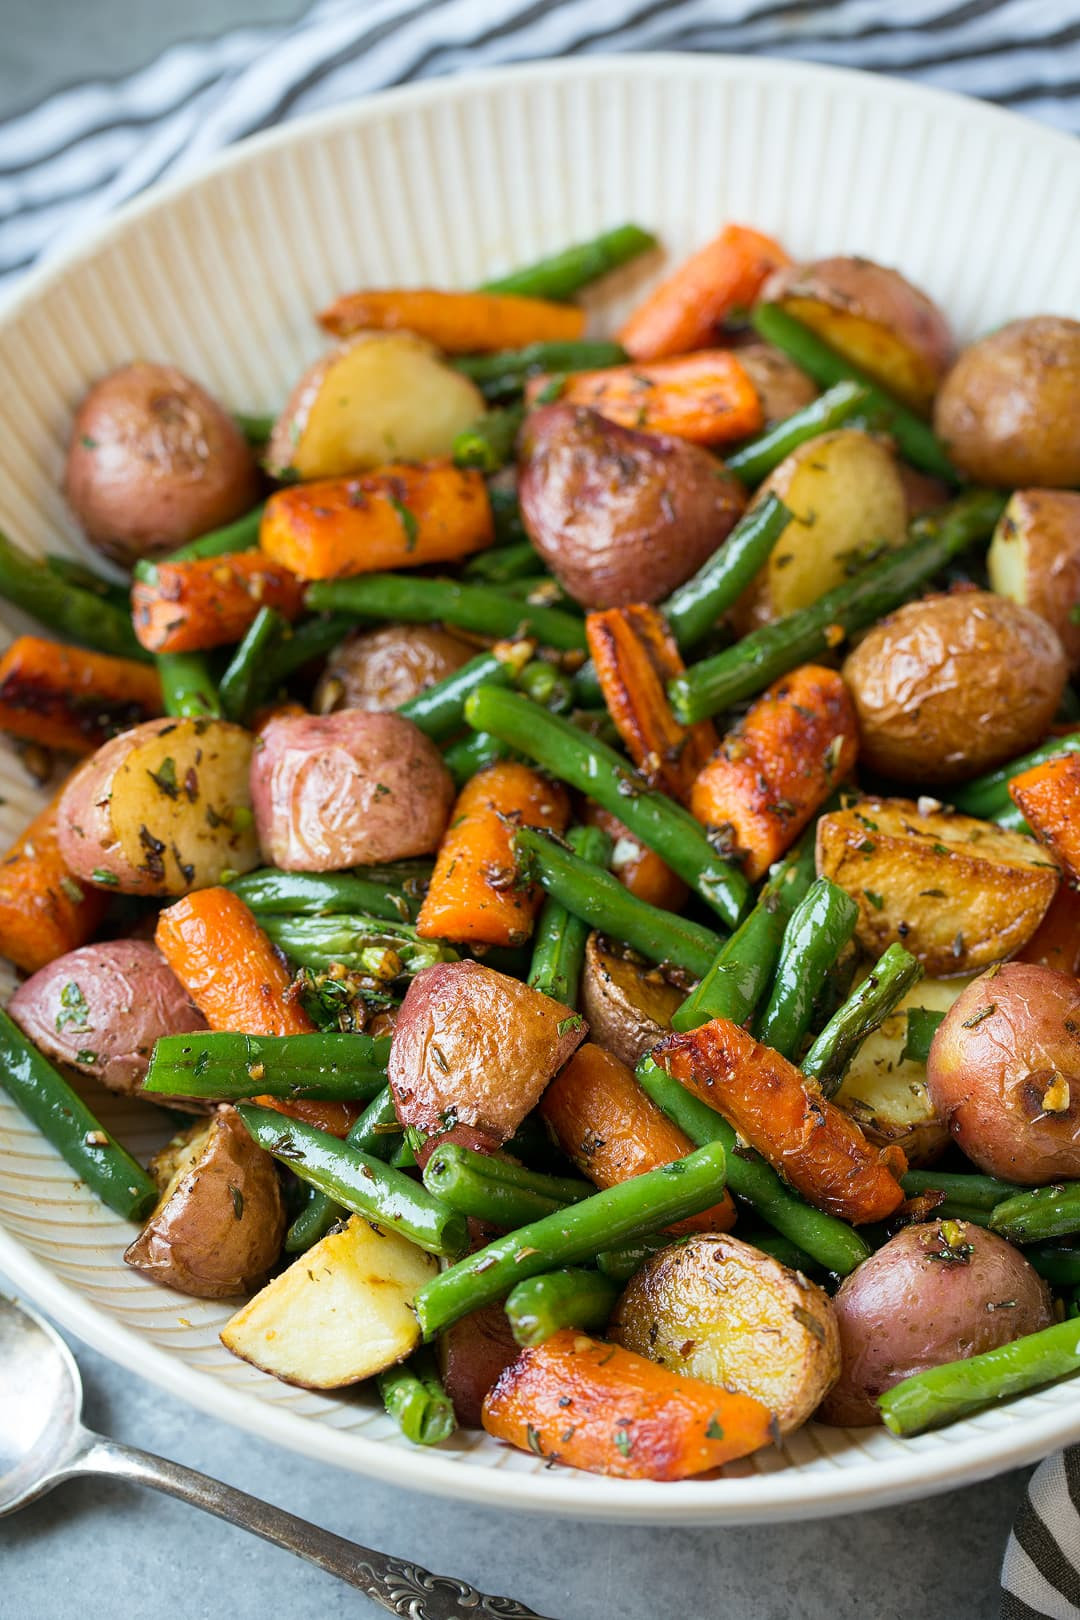 Roasted Baby Potatoes And Carrots
 how long to roast potatoes and carrots in oven